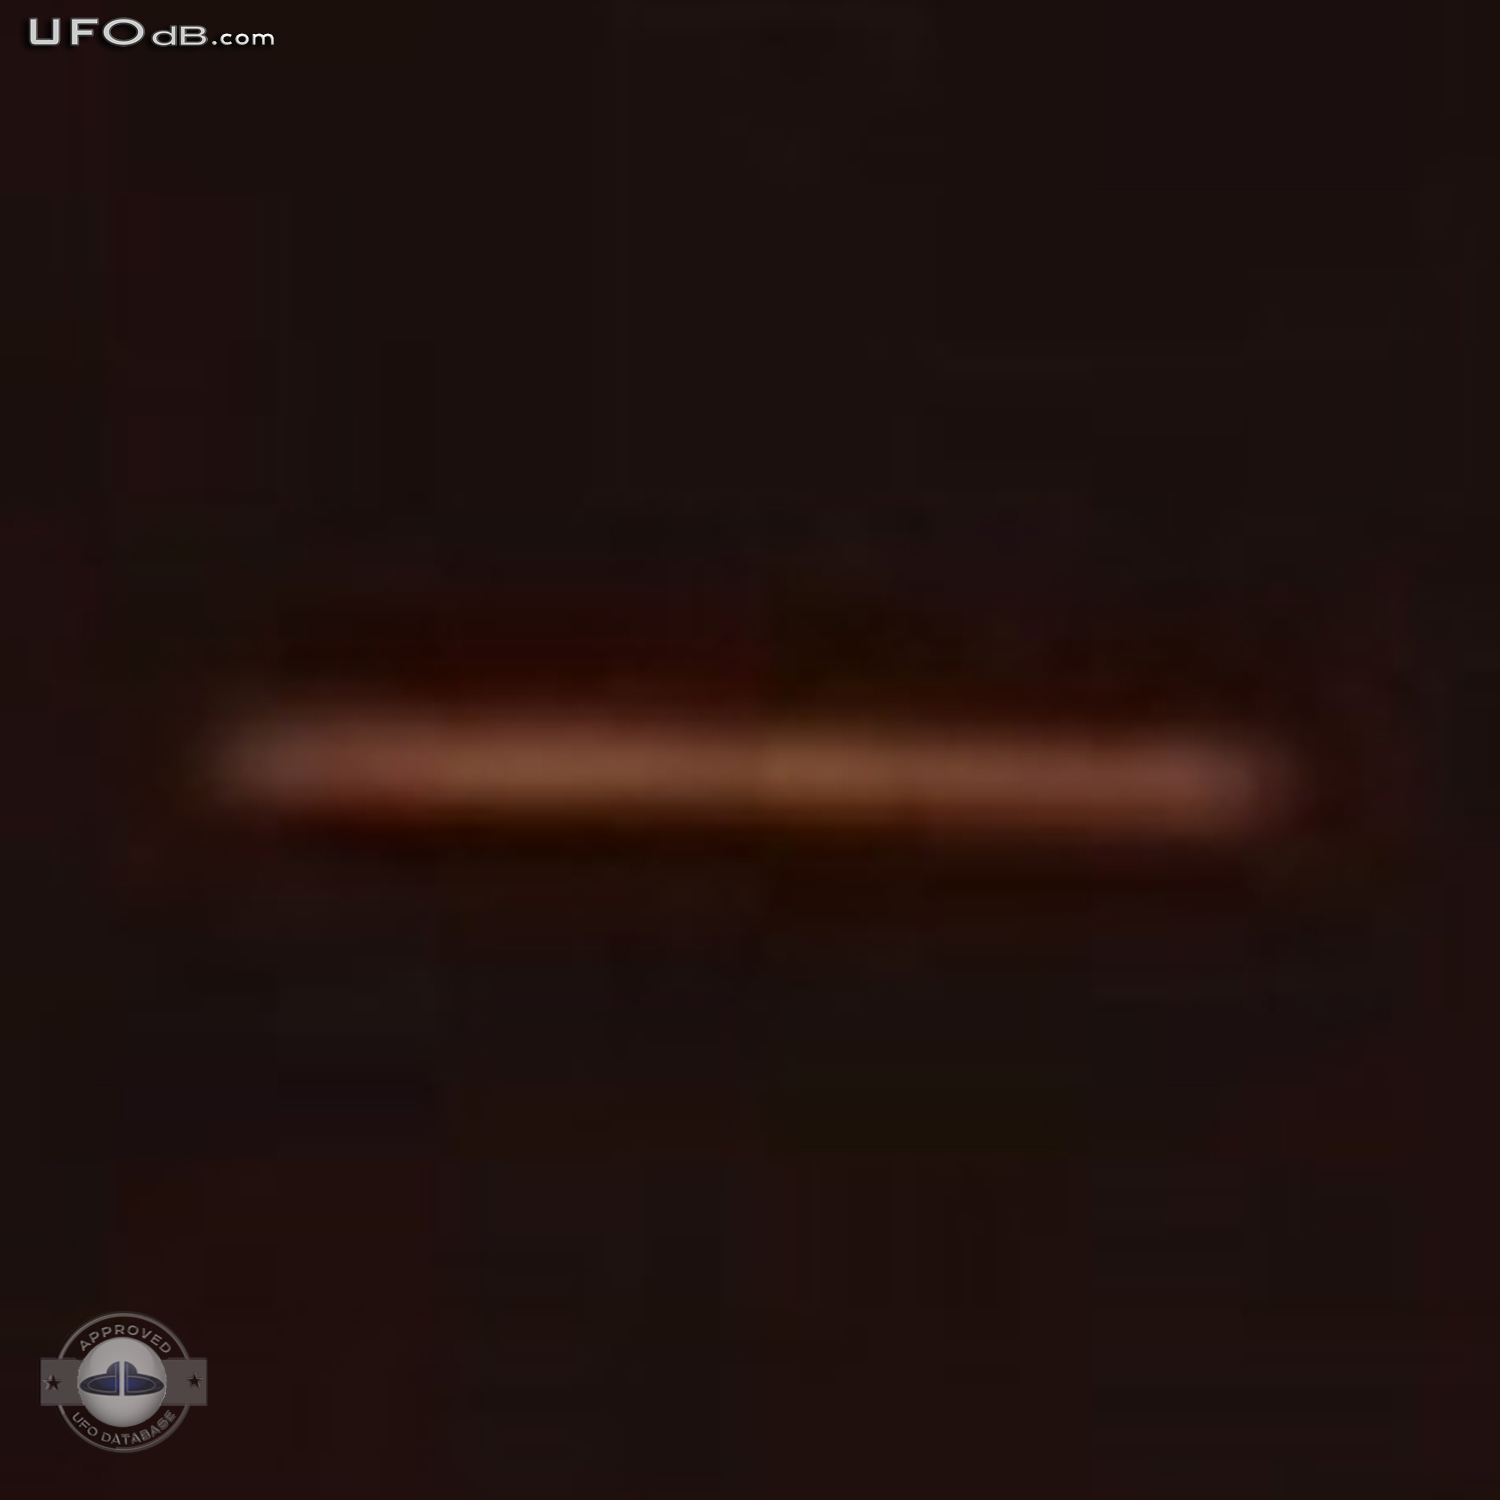 Washington No Fly Zone visited by a UFO | D.C. USA | February 14 2011 UFO Picture #258-4